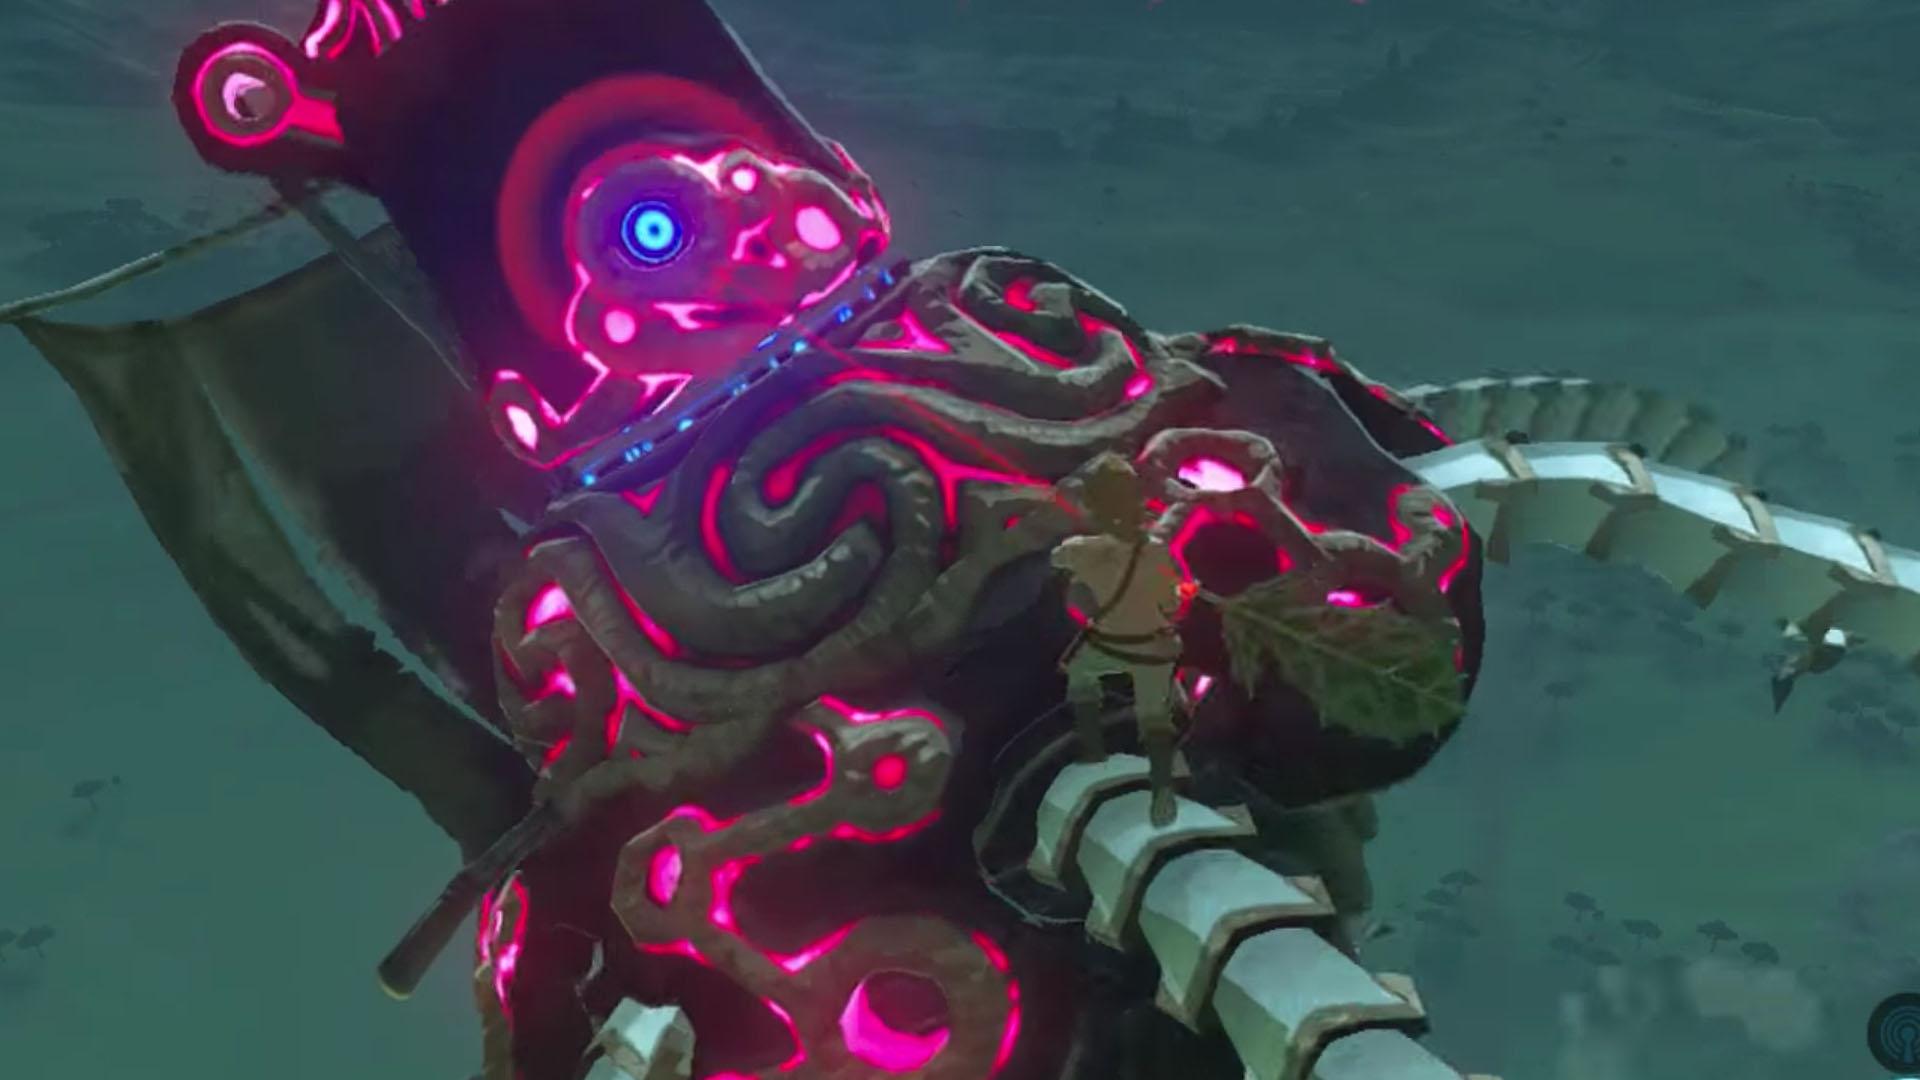 Breath of the Wild player manages to fly a Guardian through